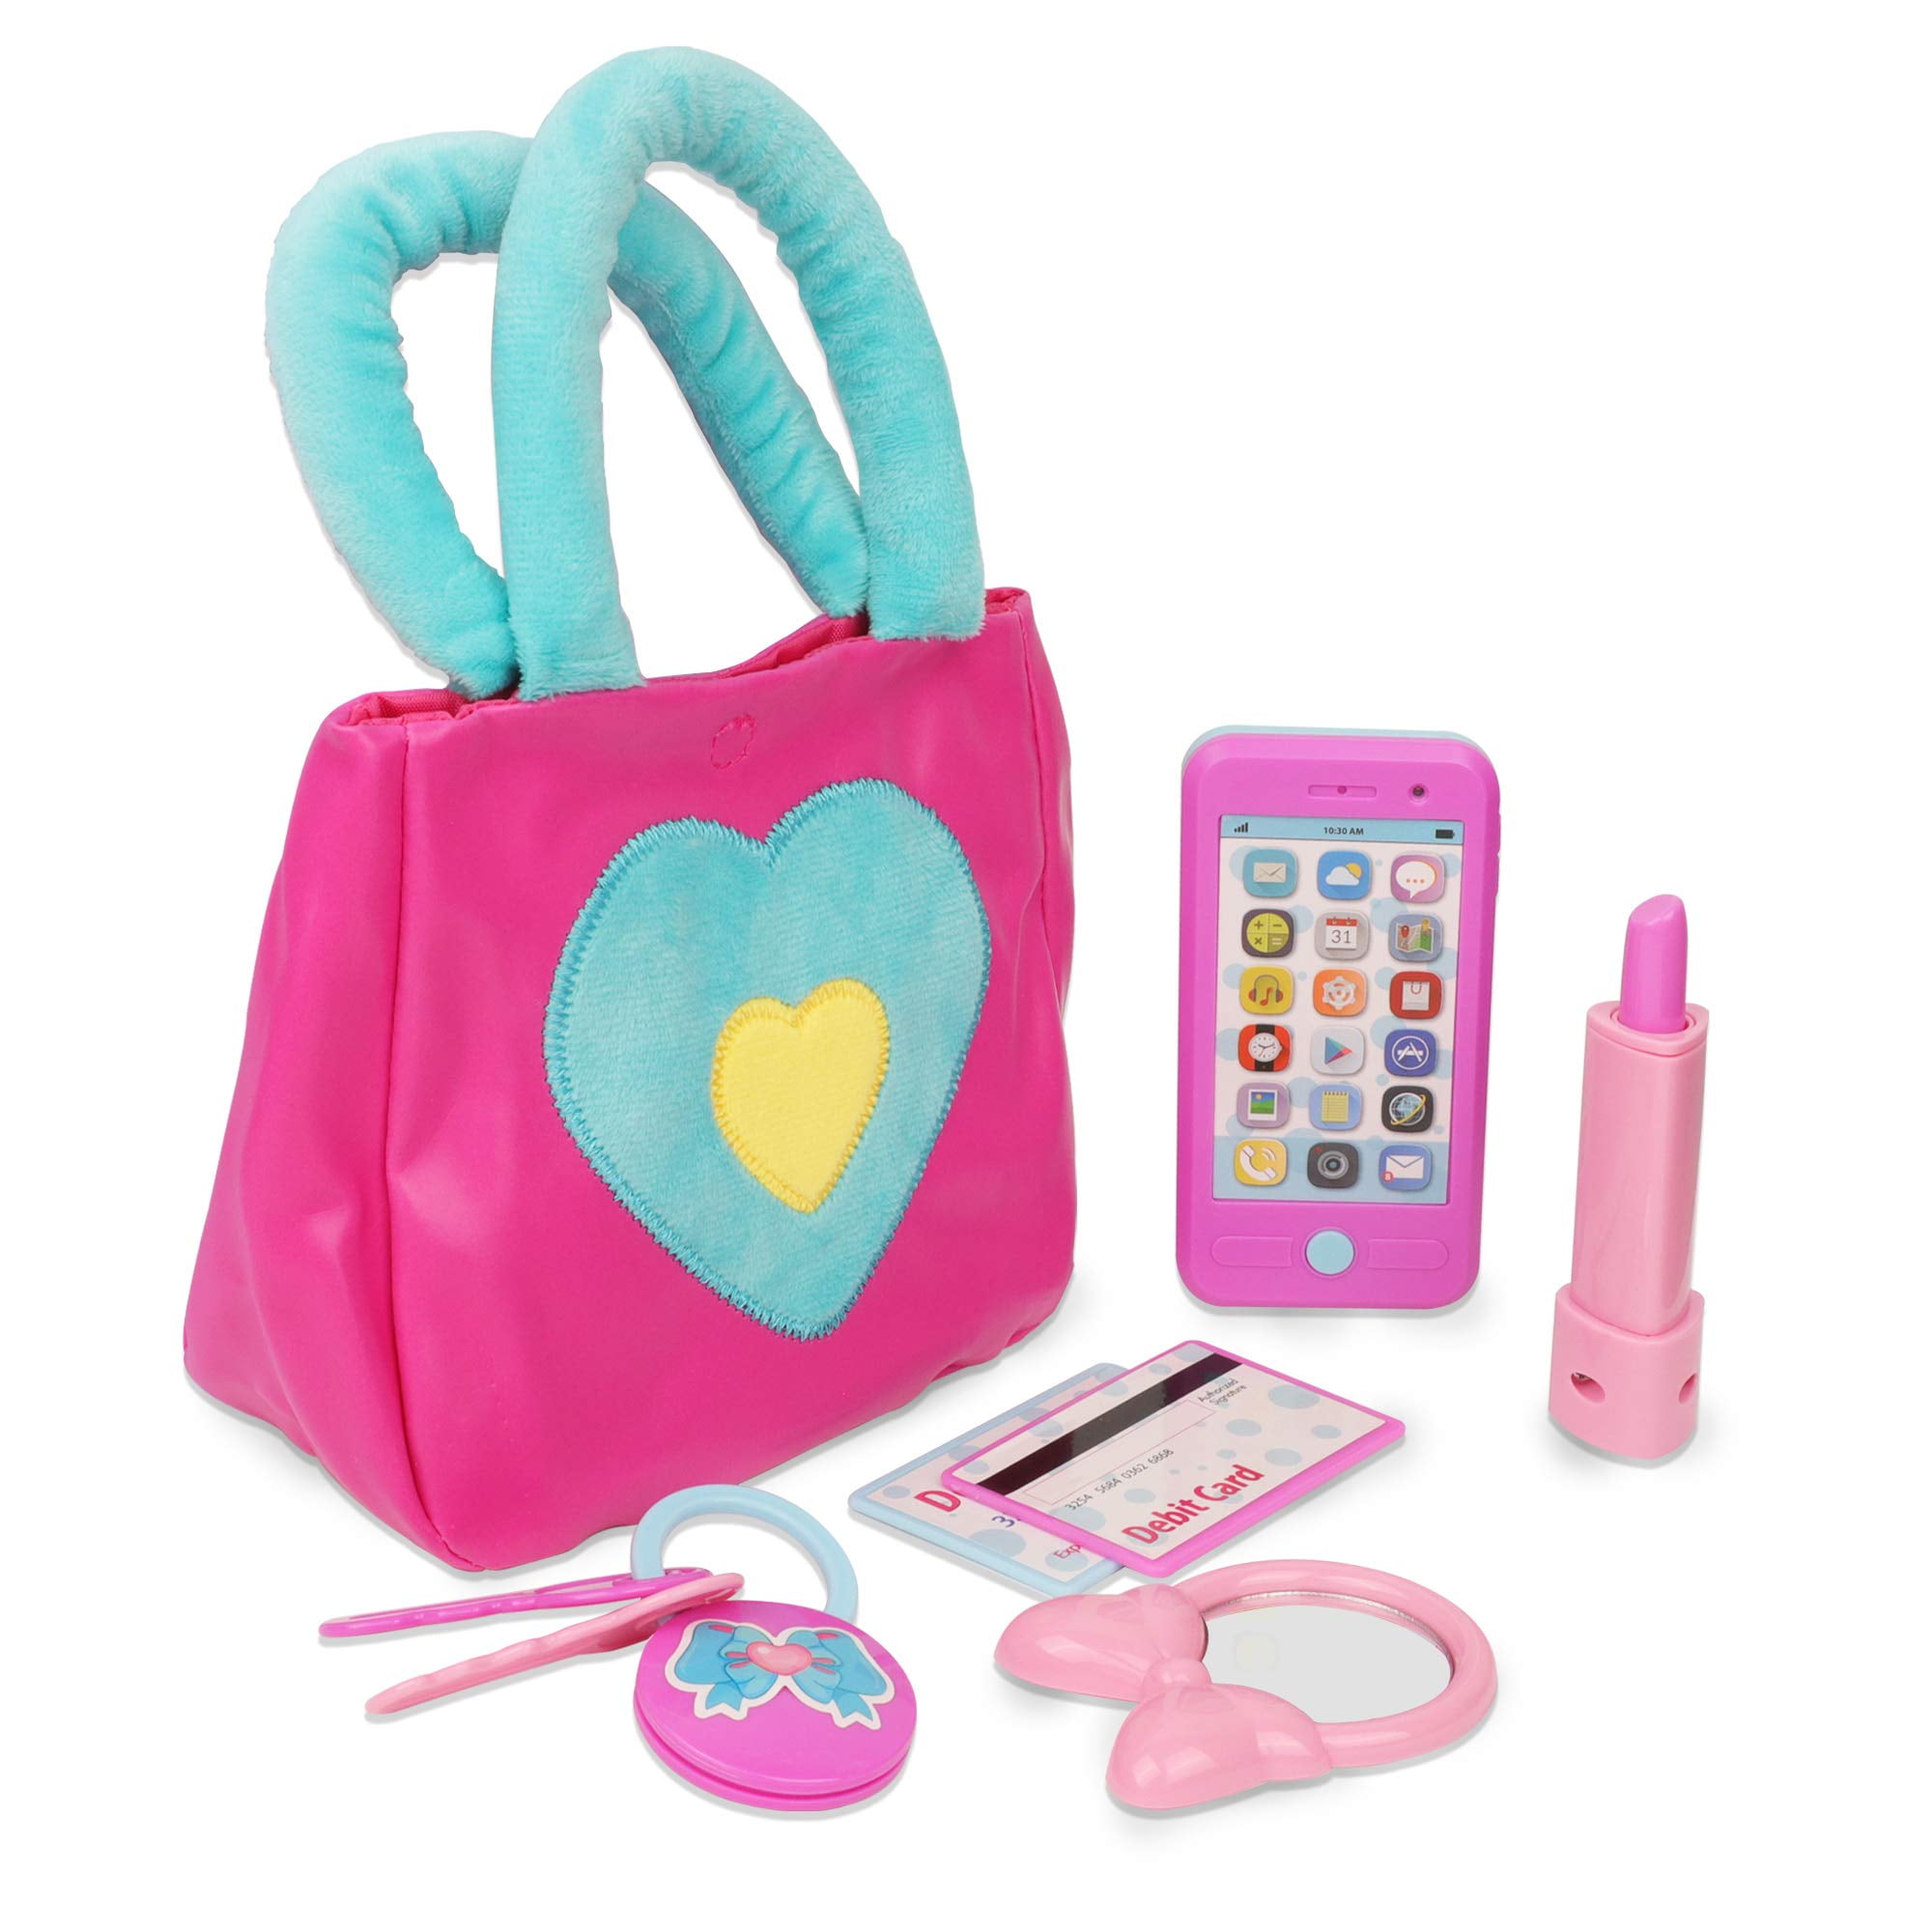 Playkidz Princess My First Purse Set - 7 Pieces Play and Accessories, Pretend Play Toy Set with Cool Girl Phone and Bag with Cards. - Walmart.com